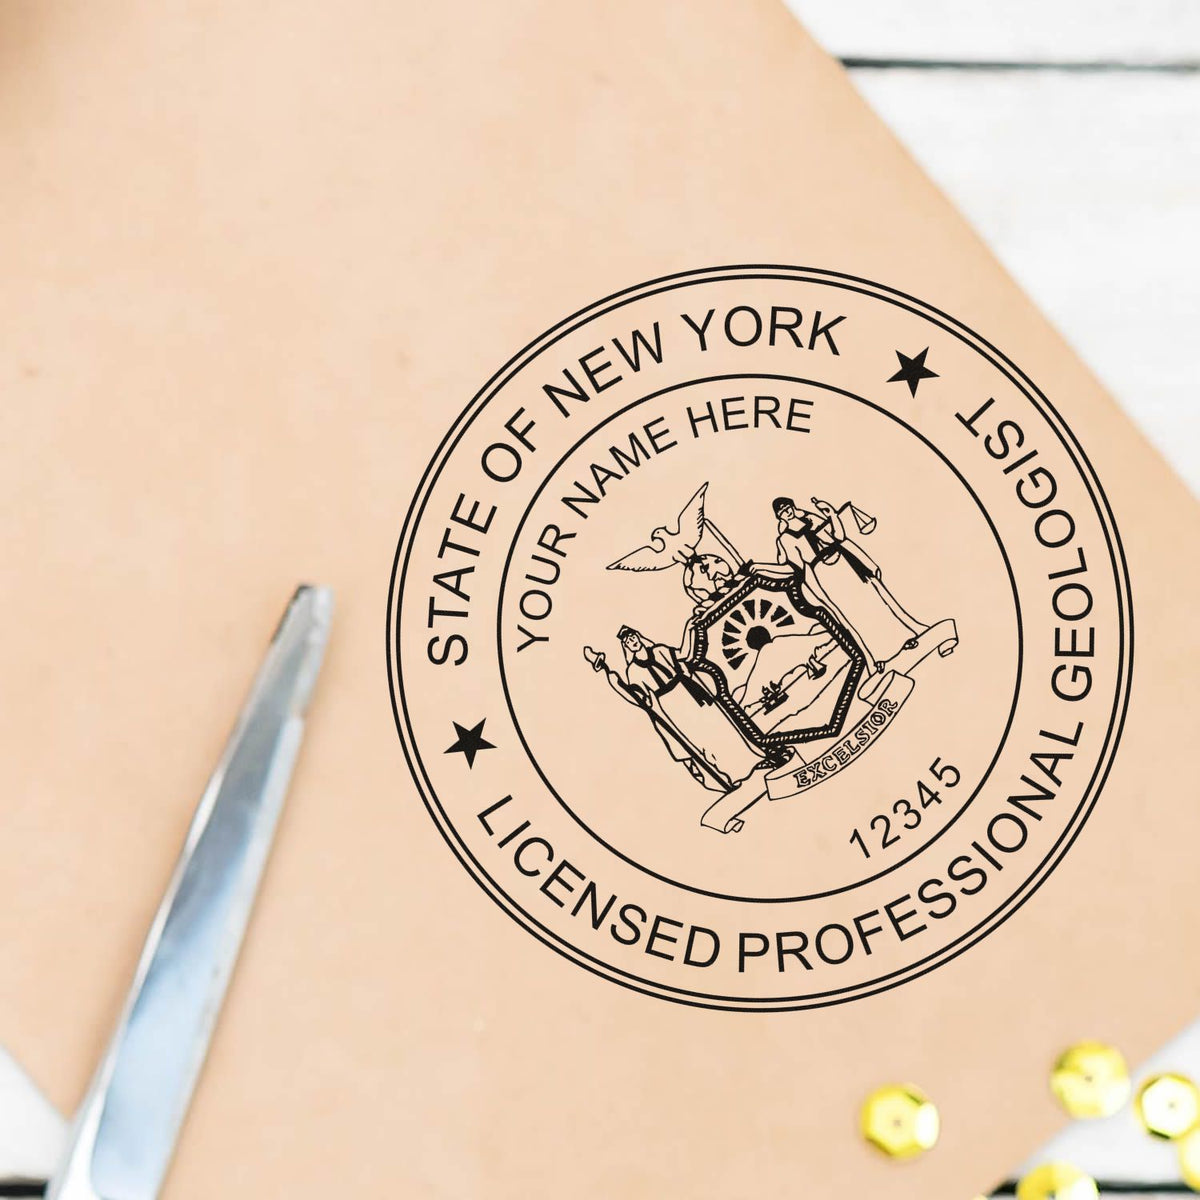 A photograph of the Slim Pre-Inked New York Professional Geologist Seal Stamp stamp impression reveals a vivid, professional image of the on paper.